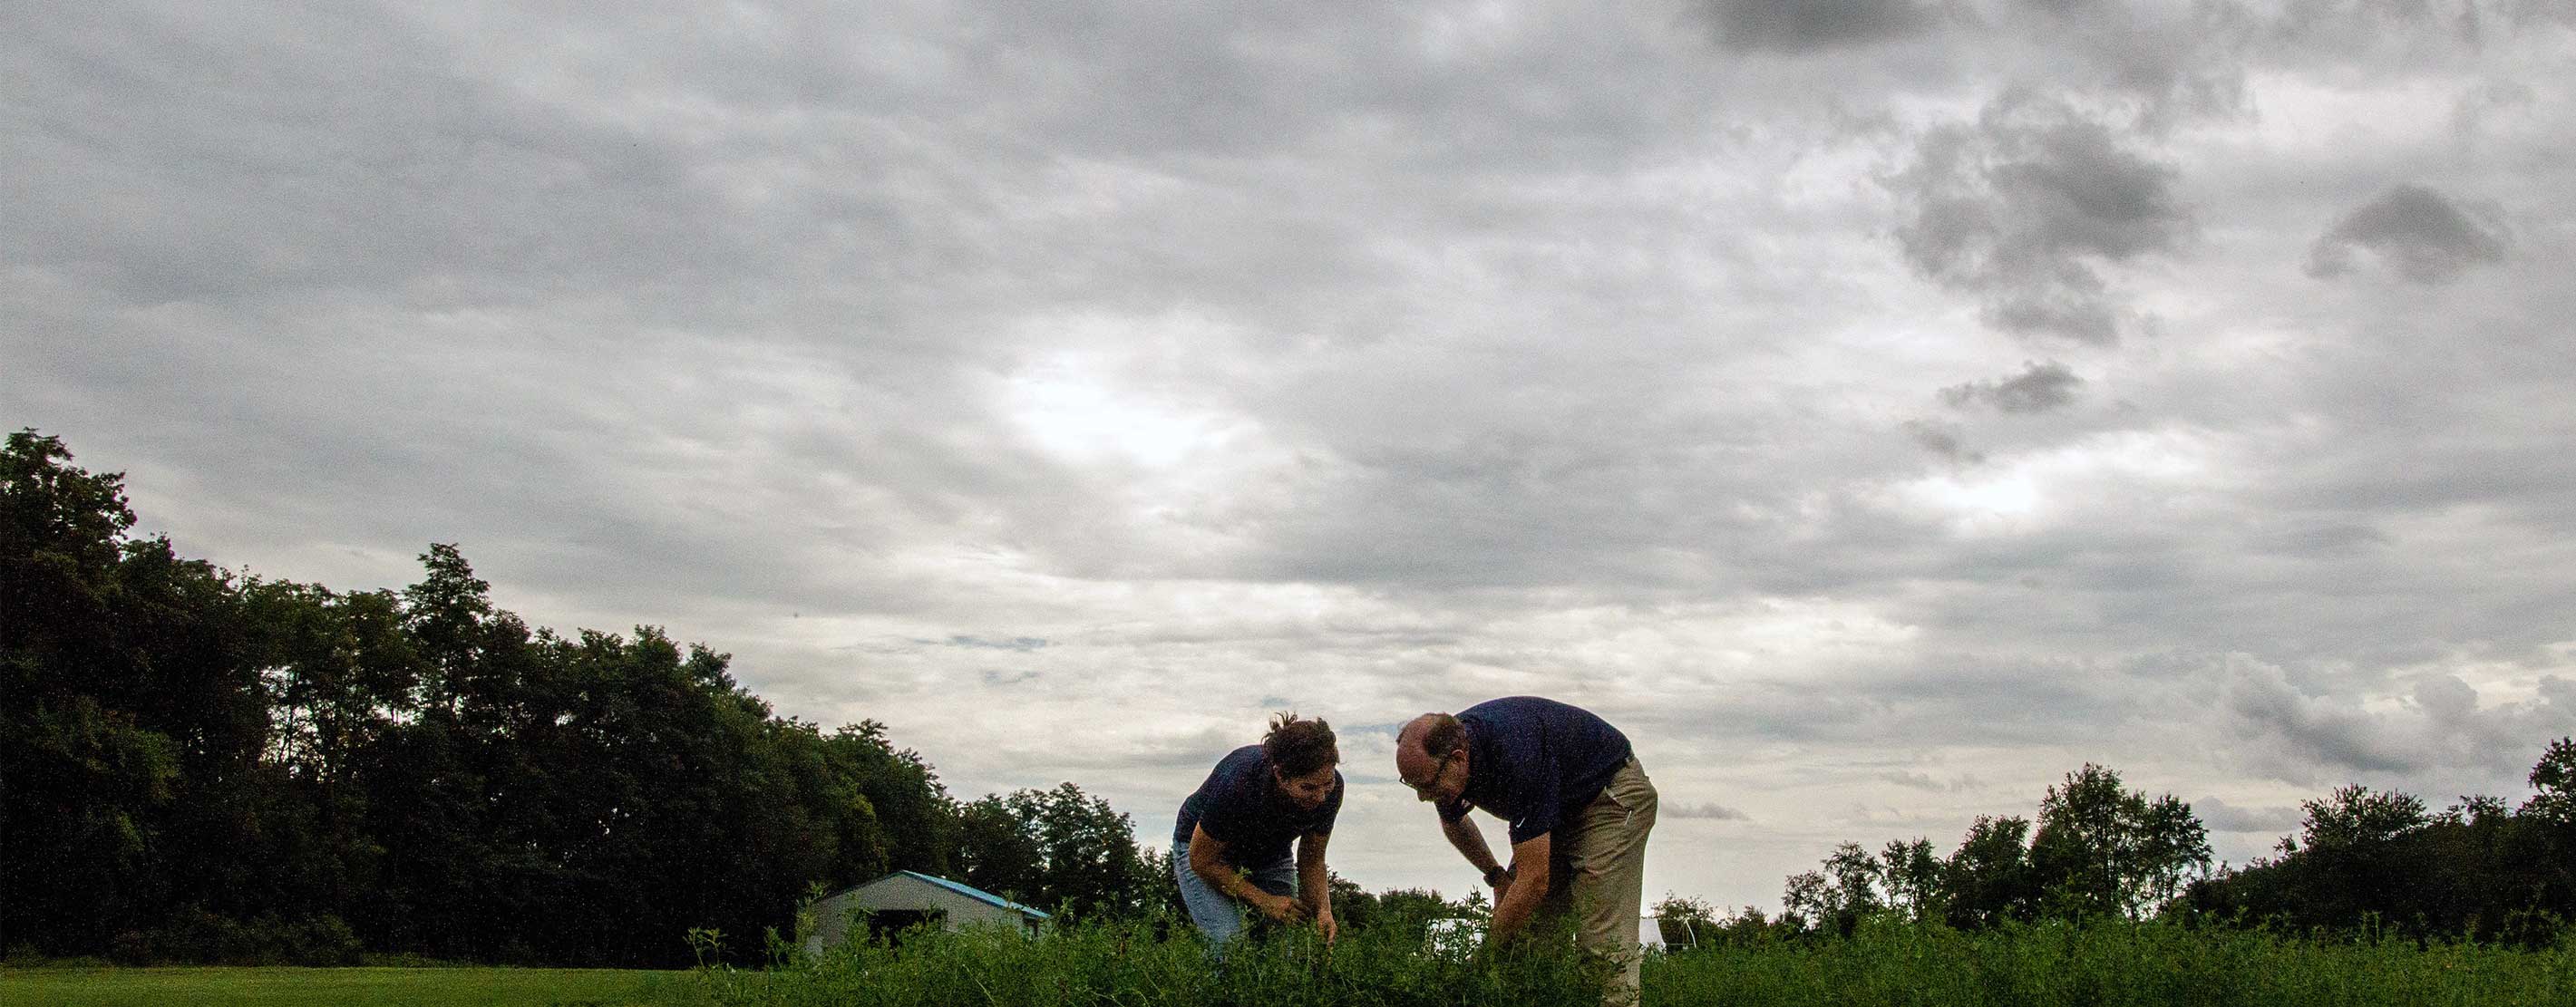 Two Agronomists In An Alfalfa Field